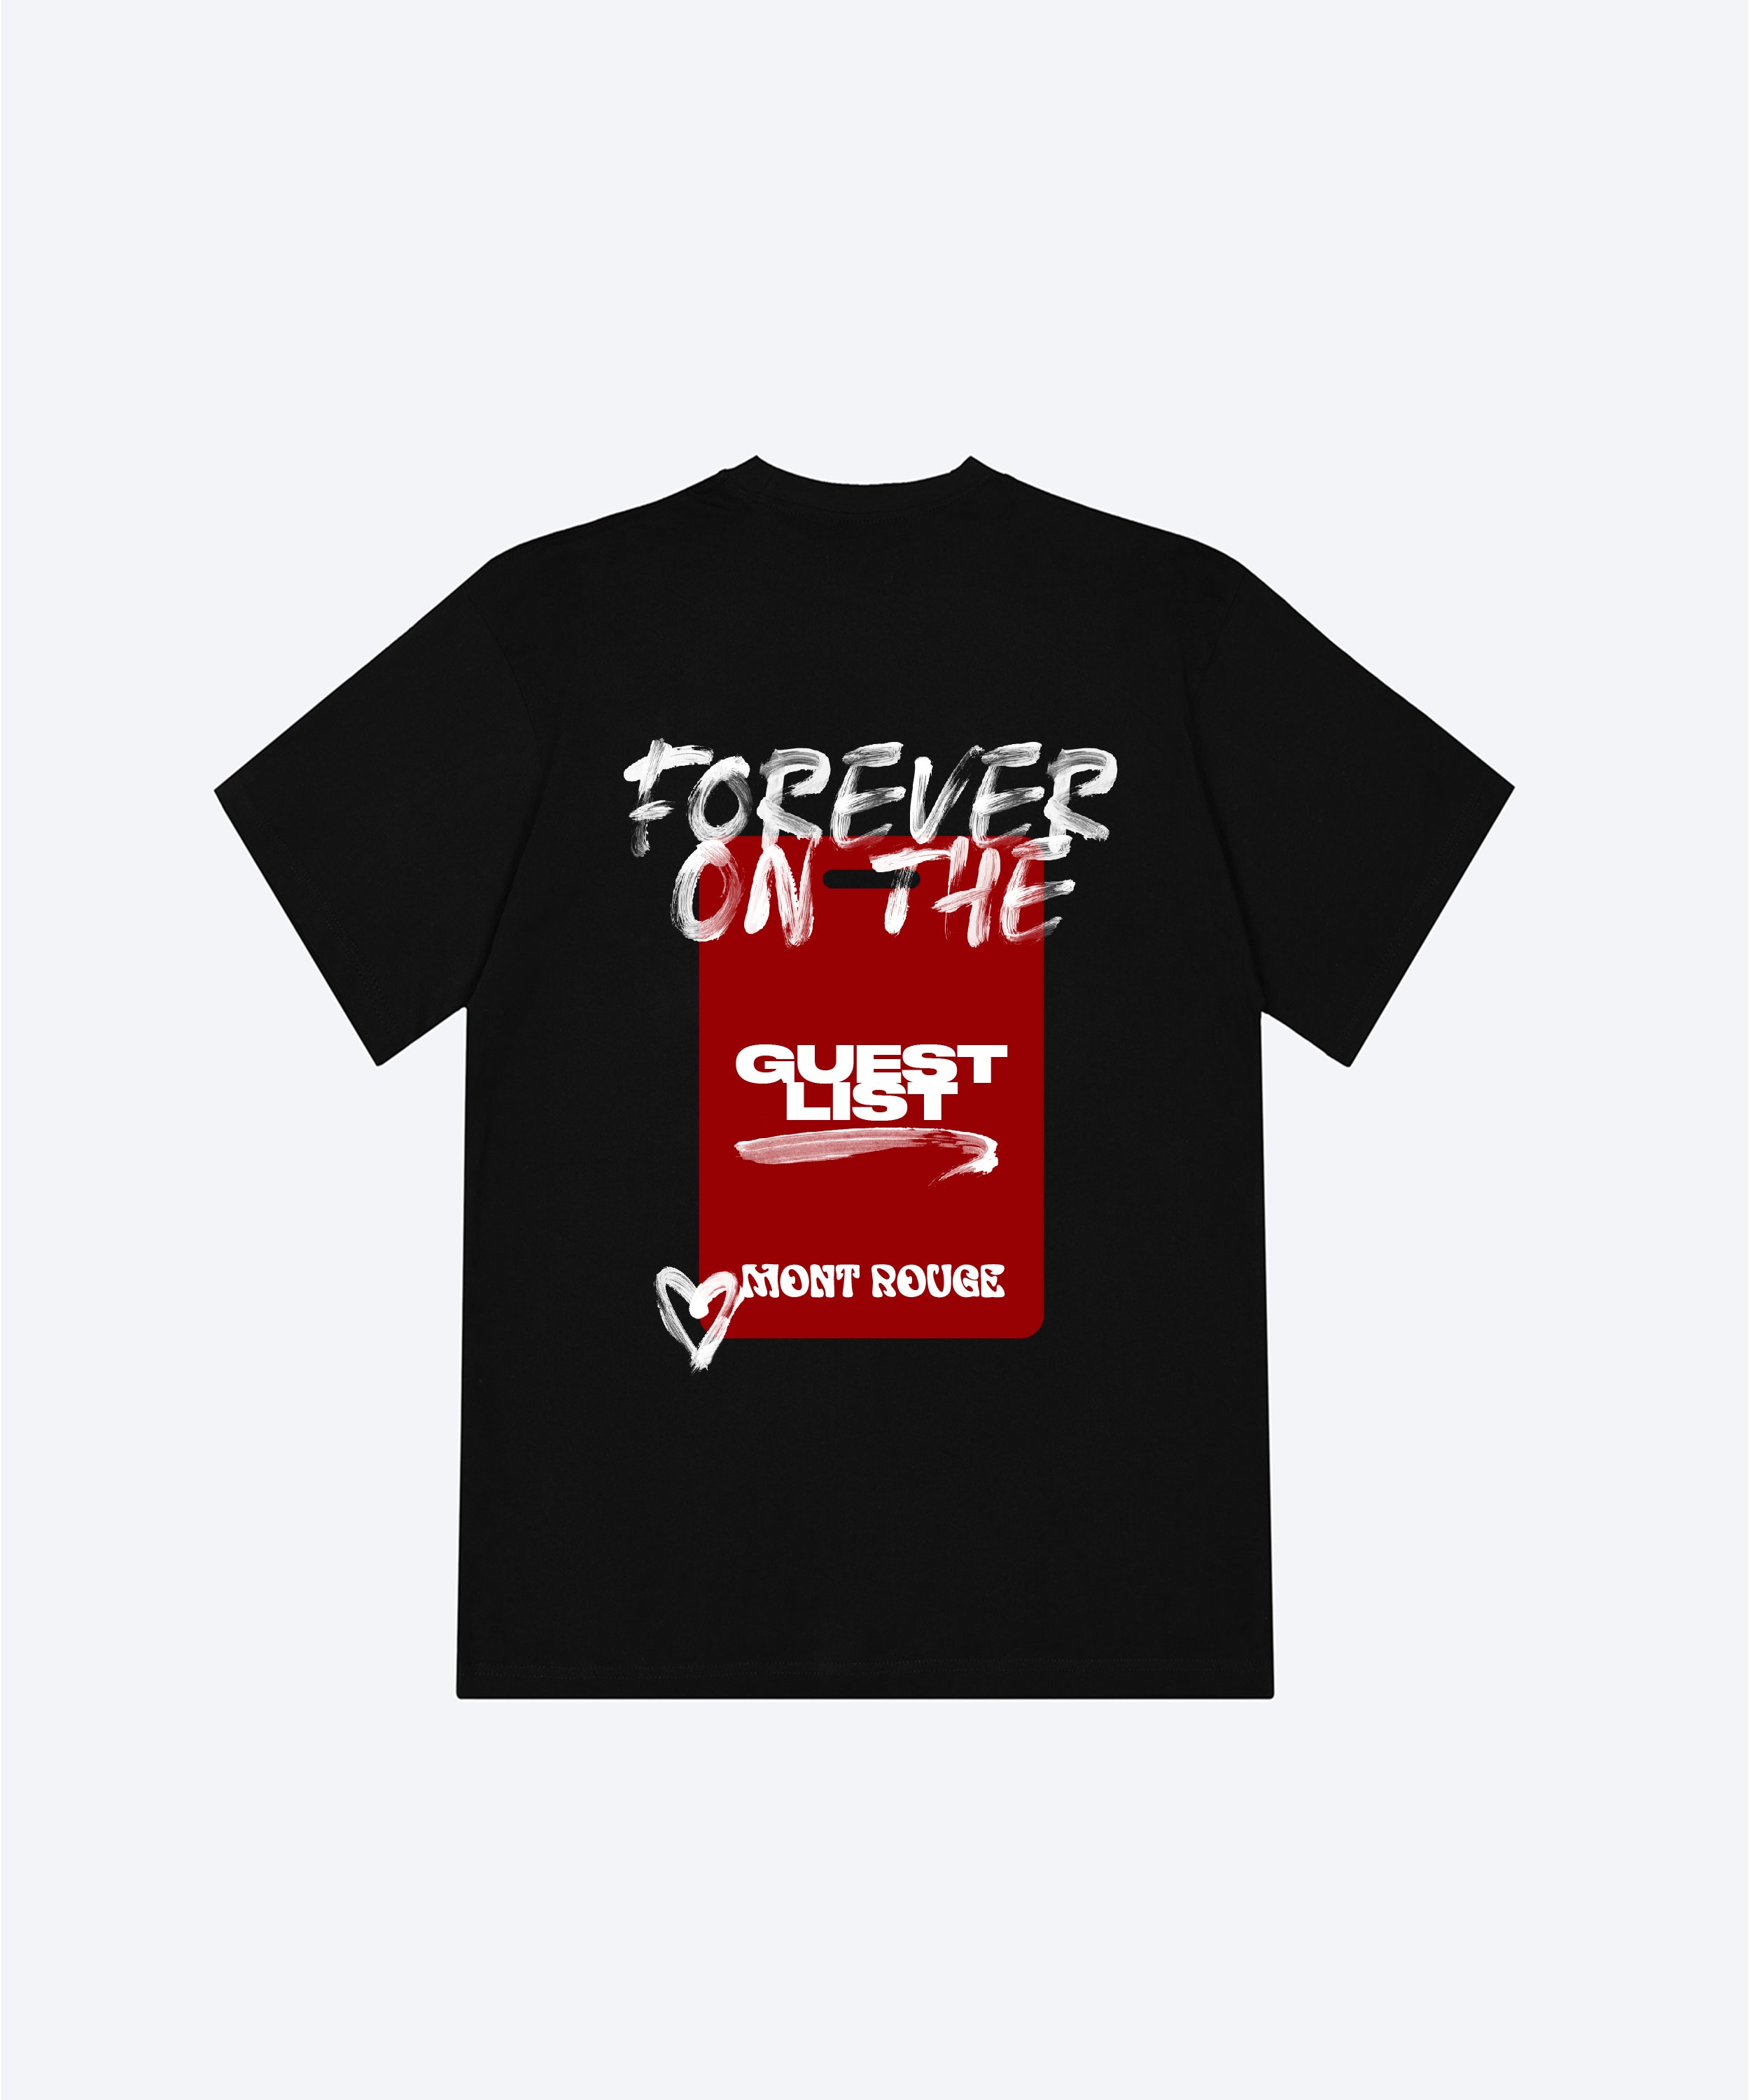 FOREVER ON THE GUESTLIST T-SHIRT (BLACK / MONT ROUGE)